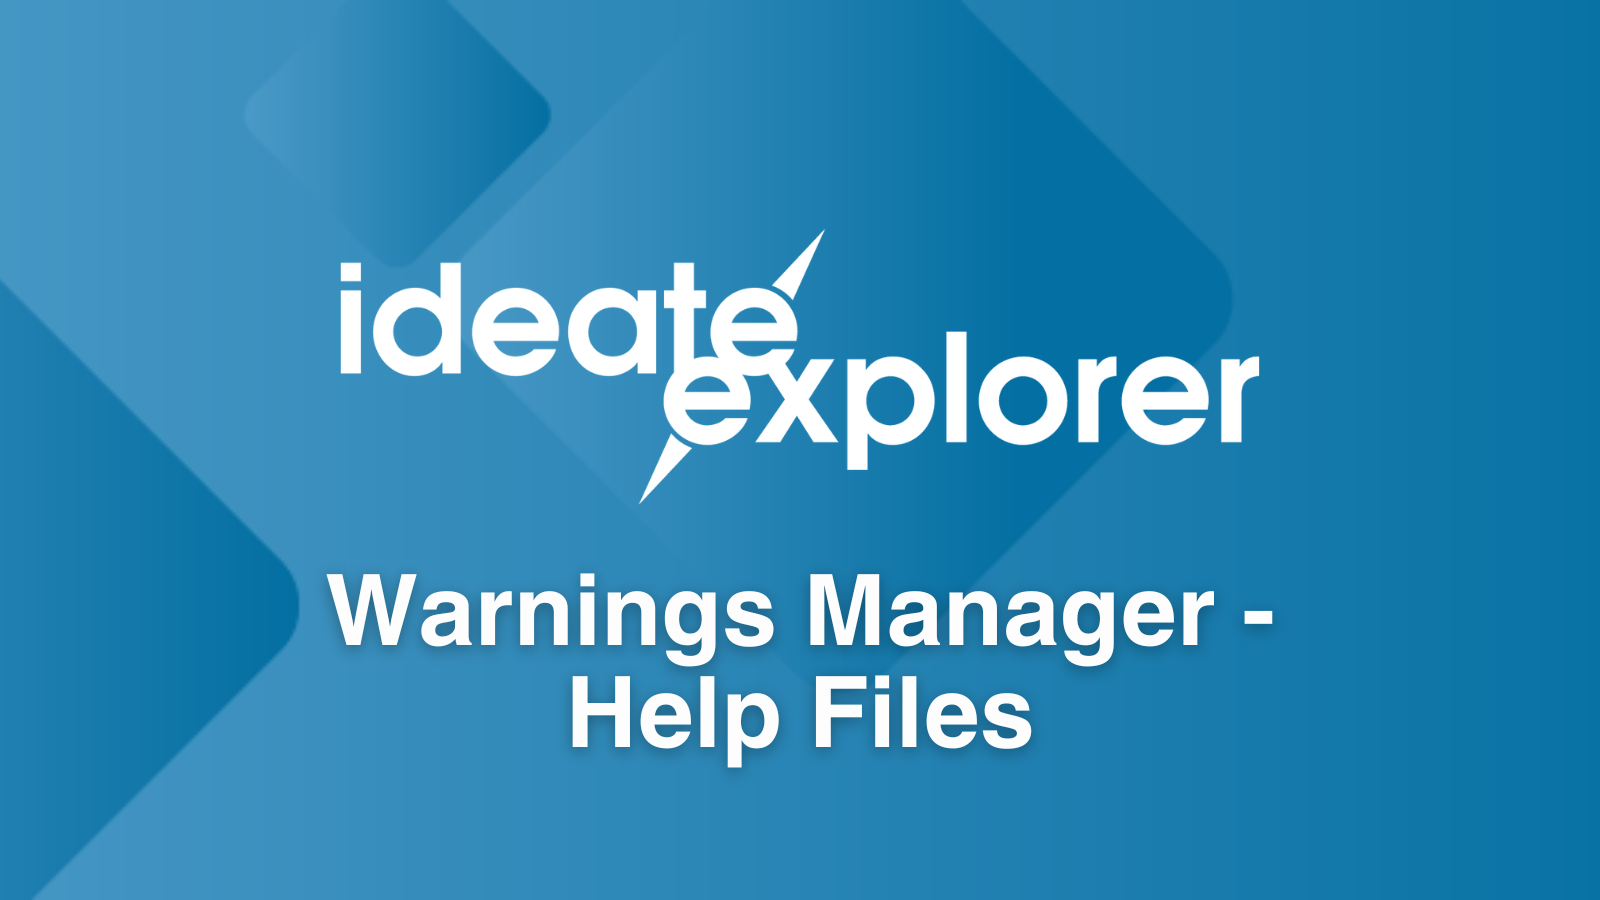 Search Ideate Explorer Warnings Manager Help Files